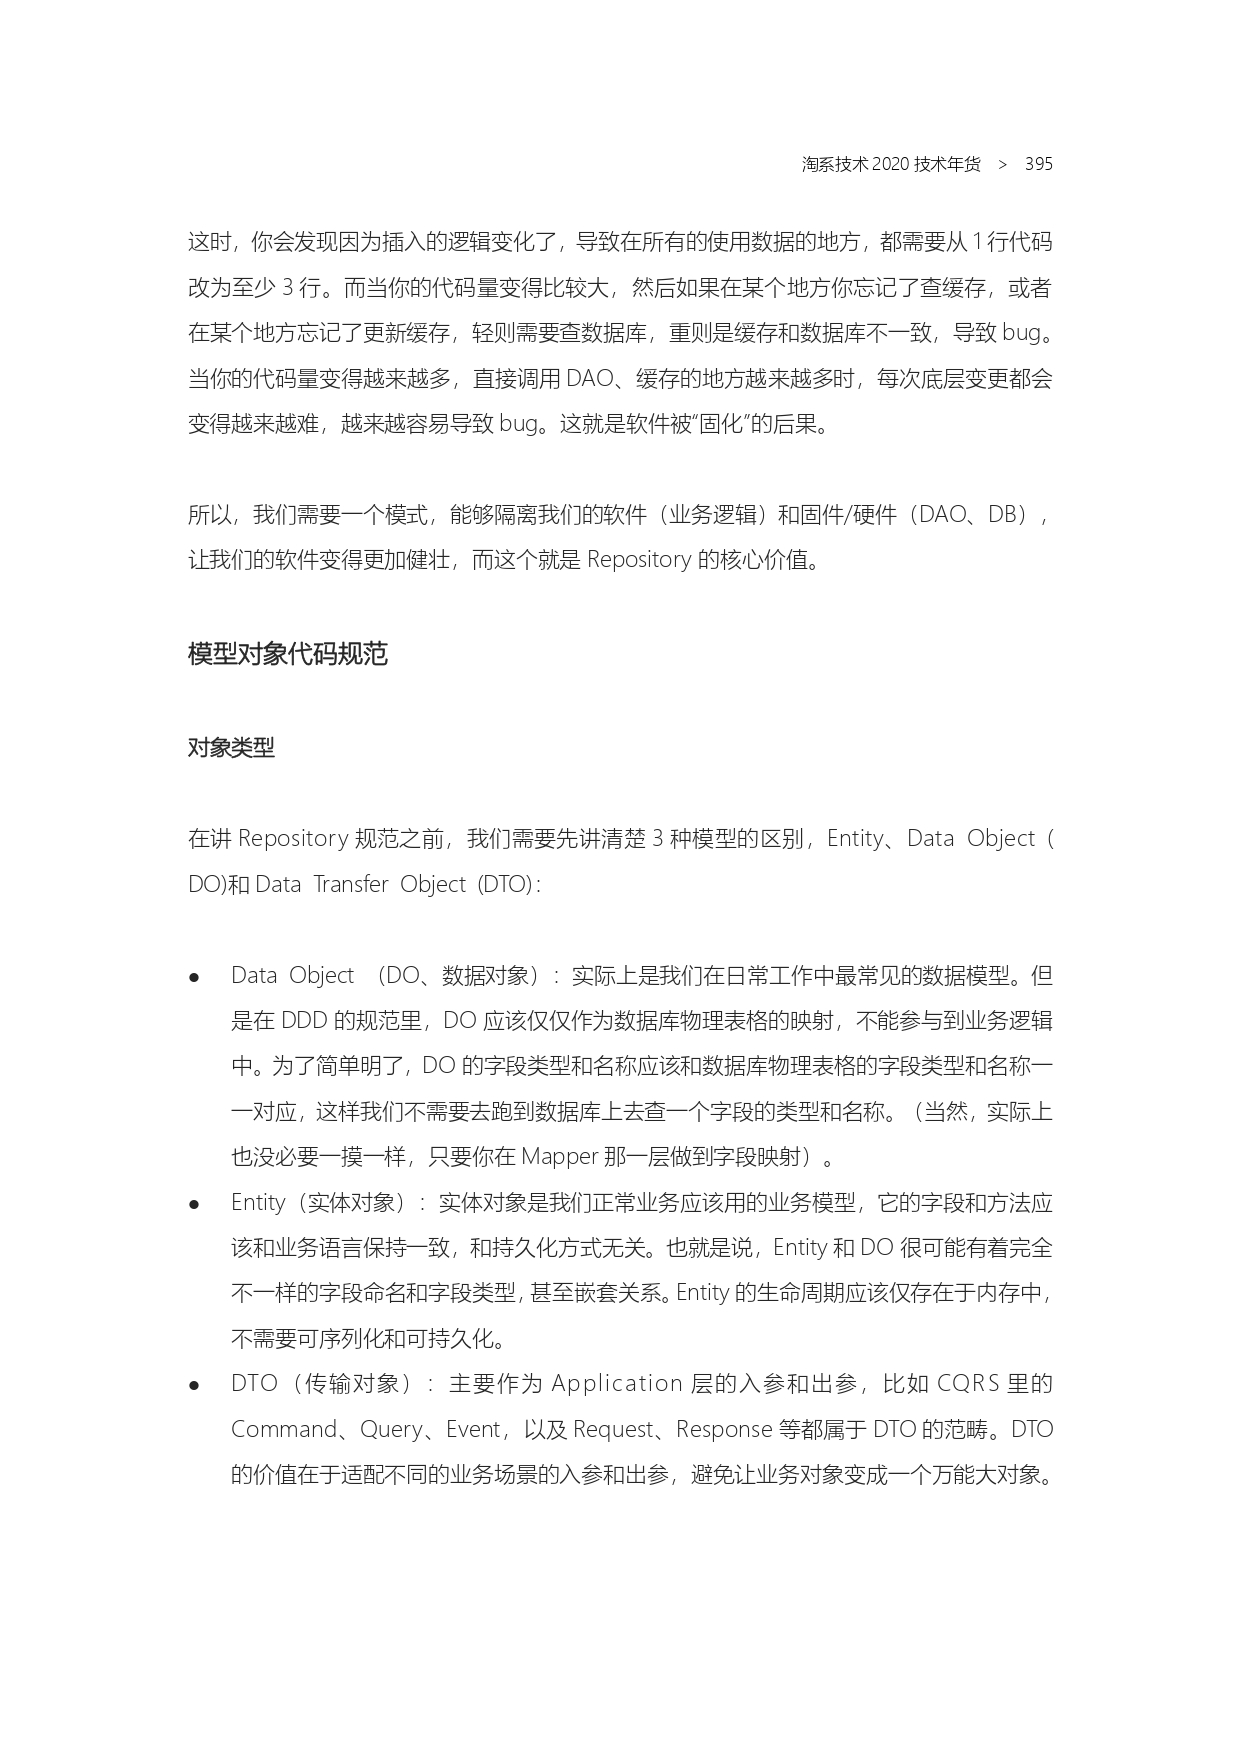 The Complete Works of Tao Technology 2020-1-570_page-0395.jpg